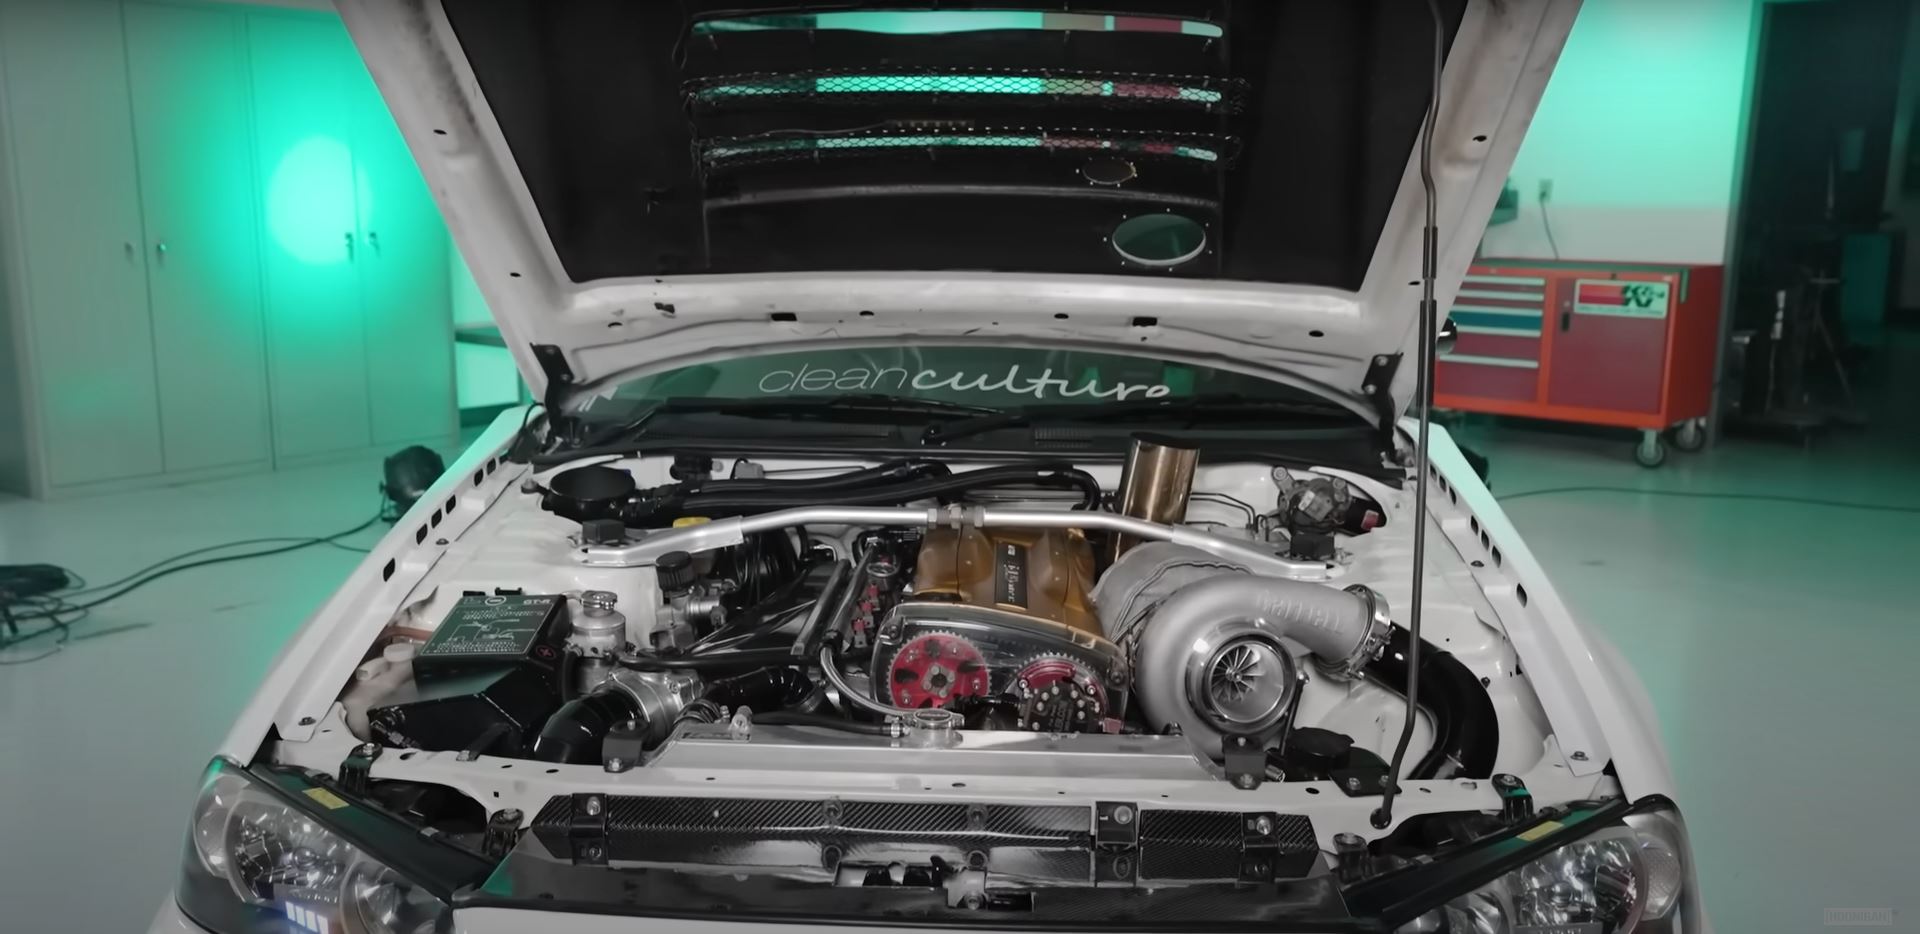 This Modified Nissan Skyline GT-R R34 Pulls Nearly 800 HP At The Dyno